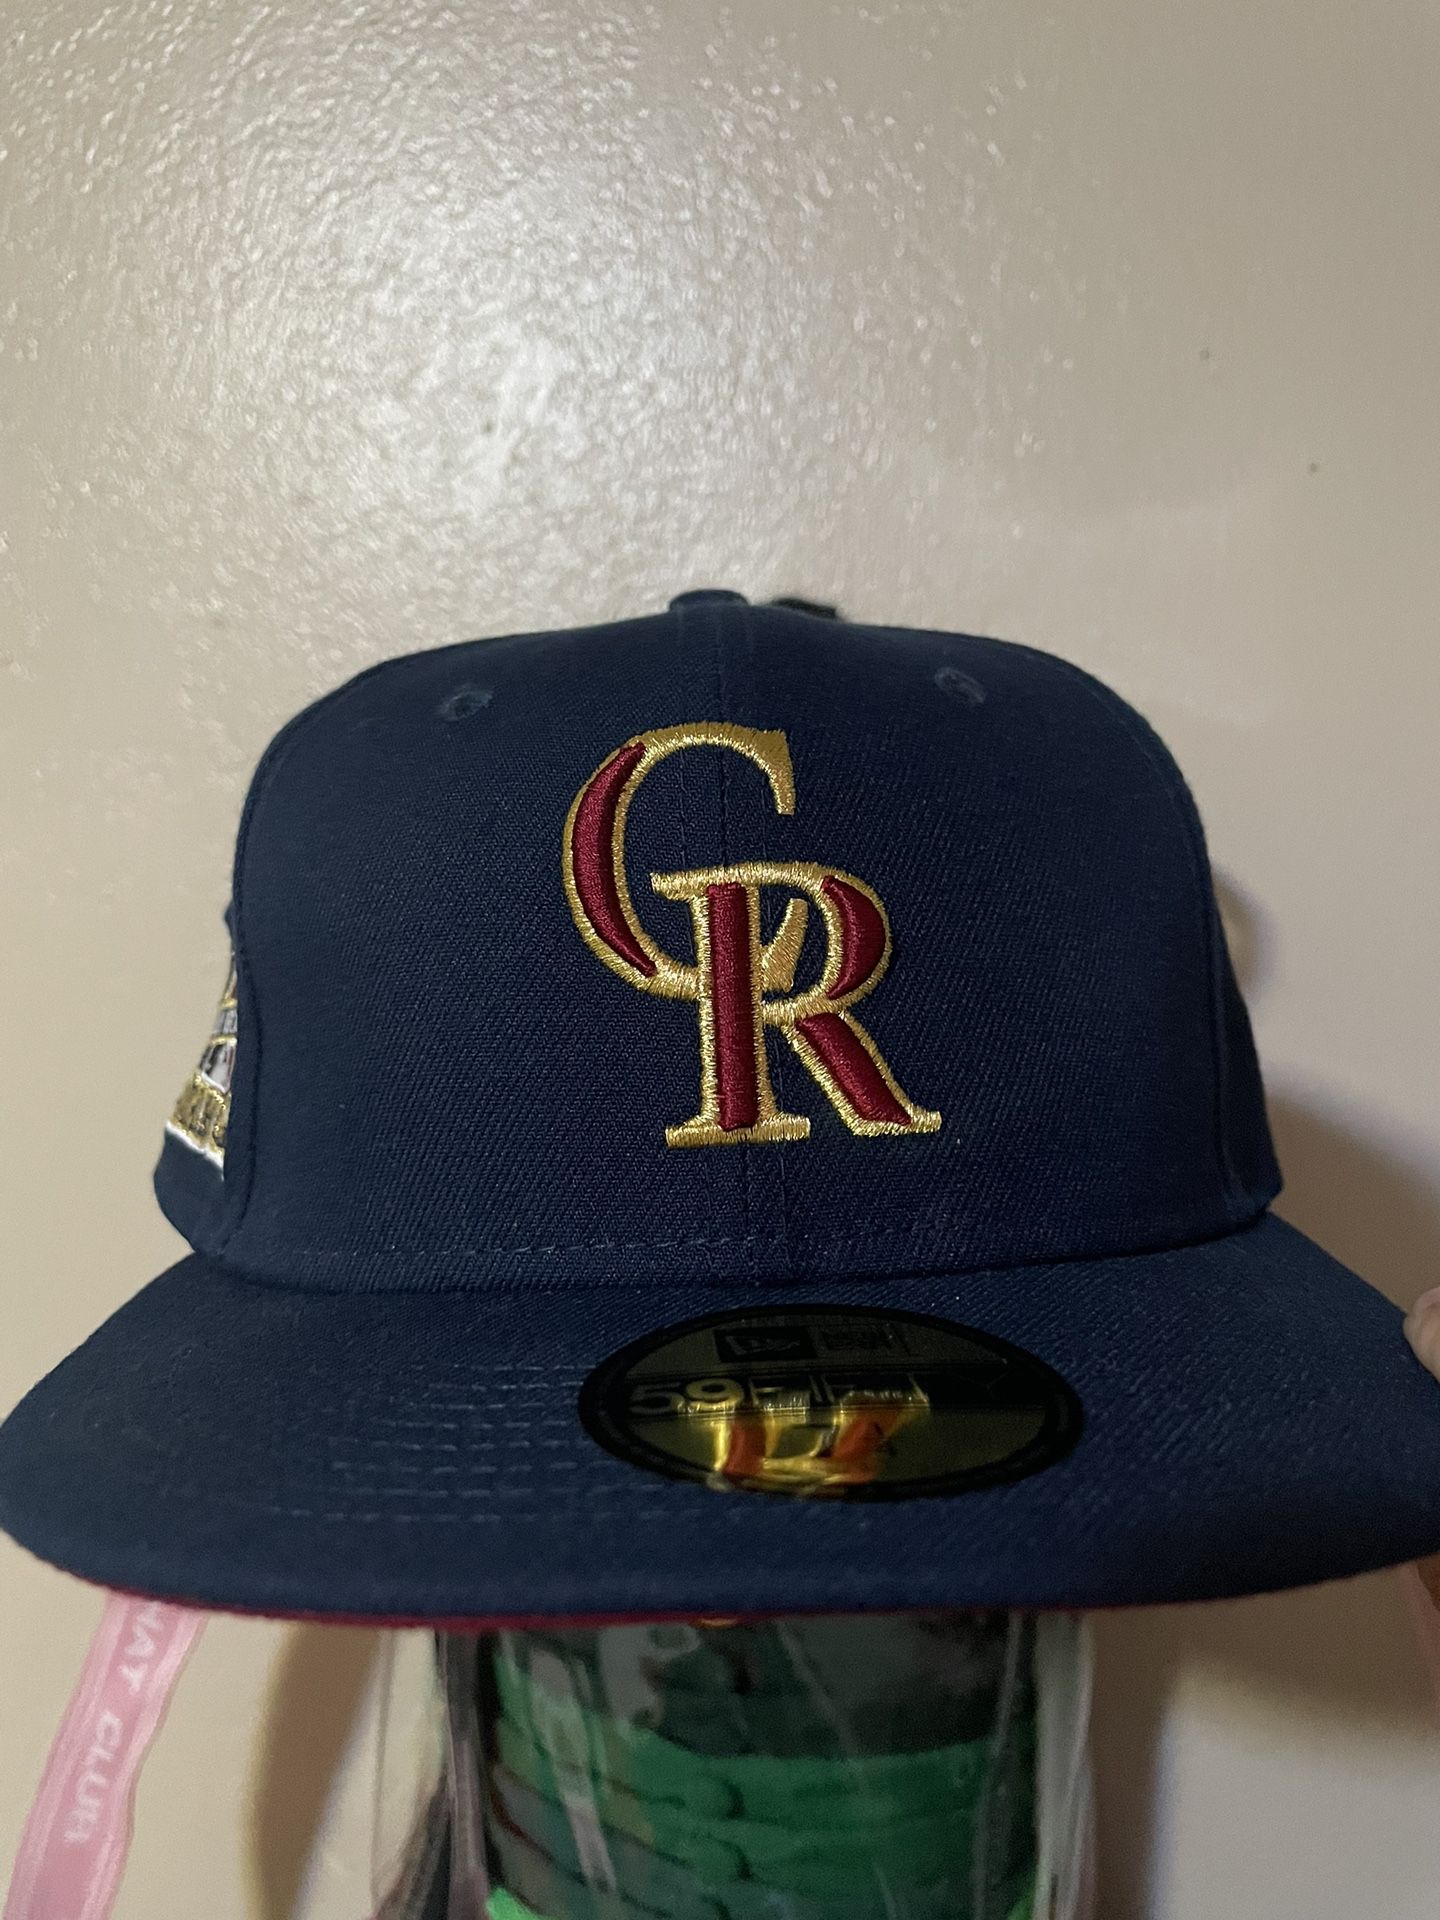 Hat Club Green/Icy Colorado Rockies for Sale in Anaheim, CA - OfferUp